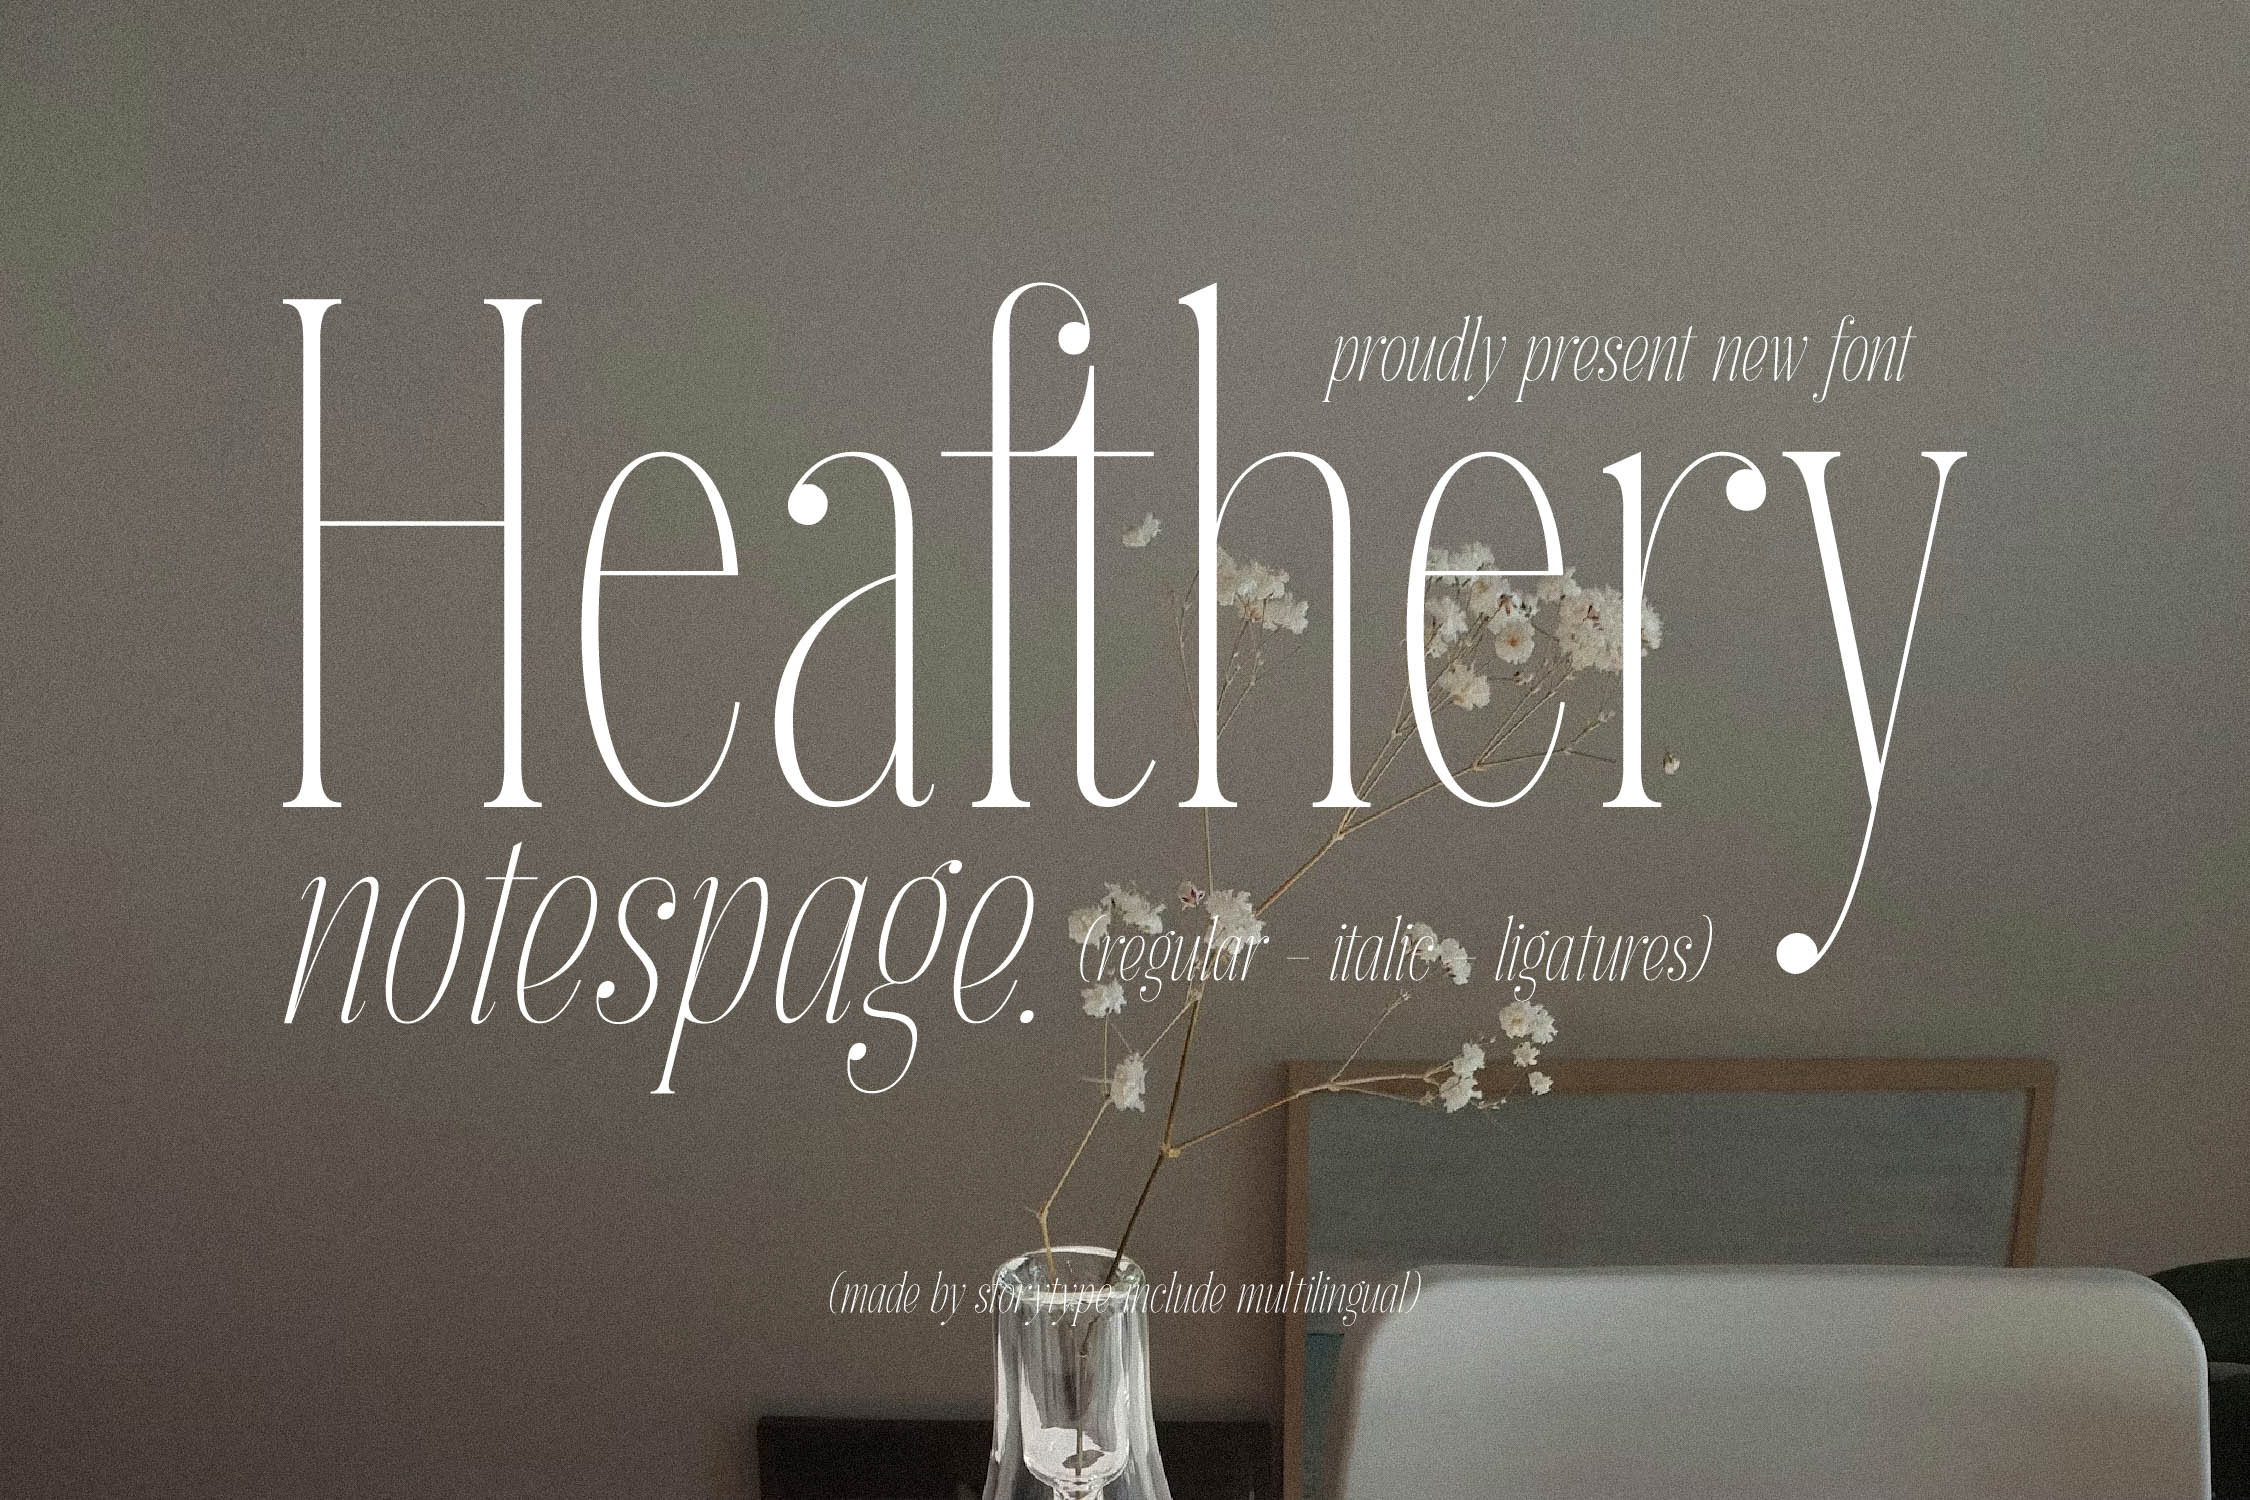 Heafthery Notespage Free Font